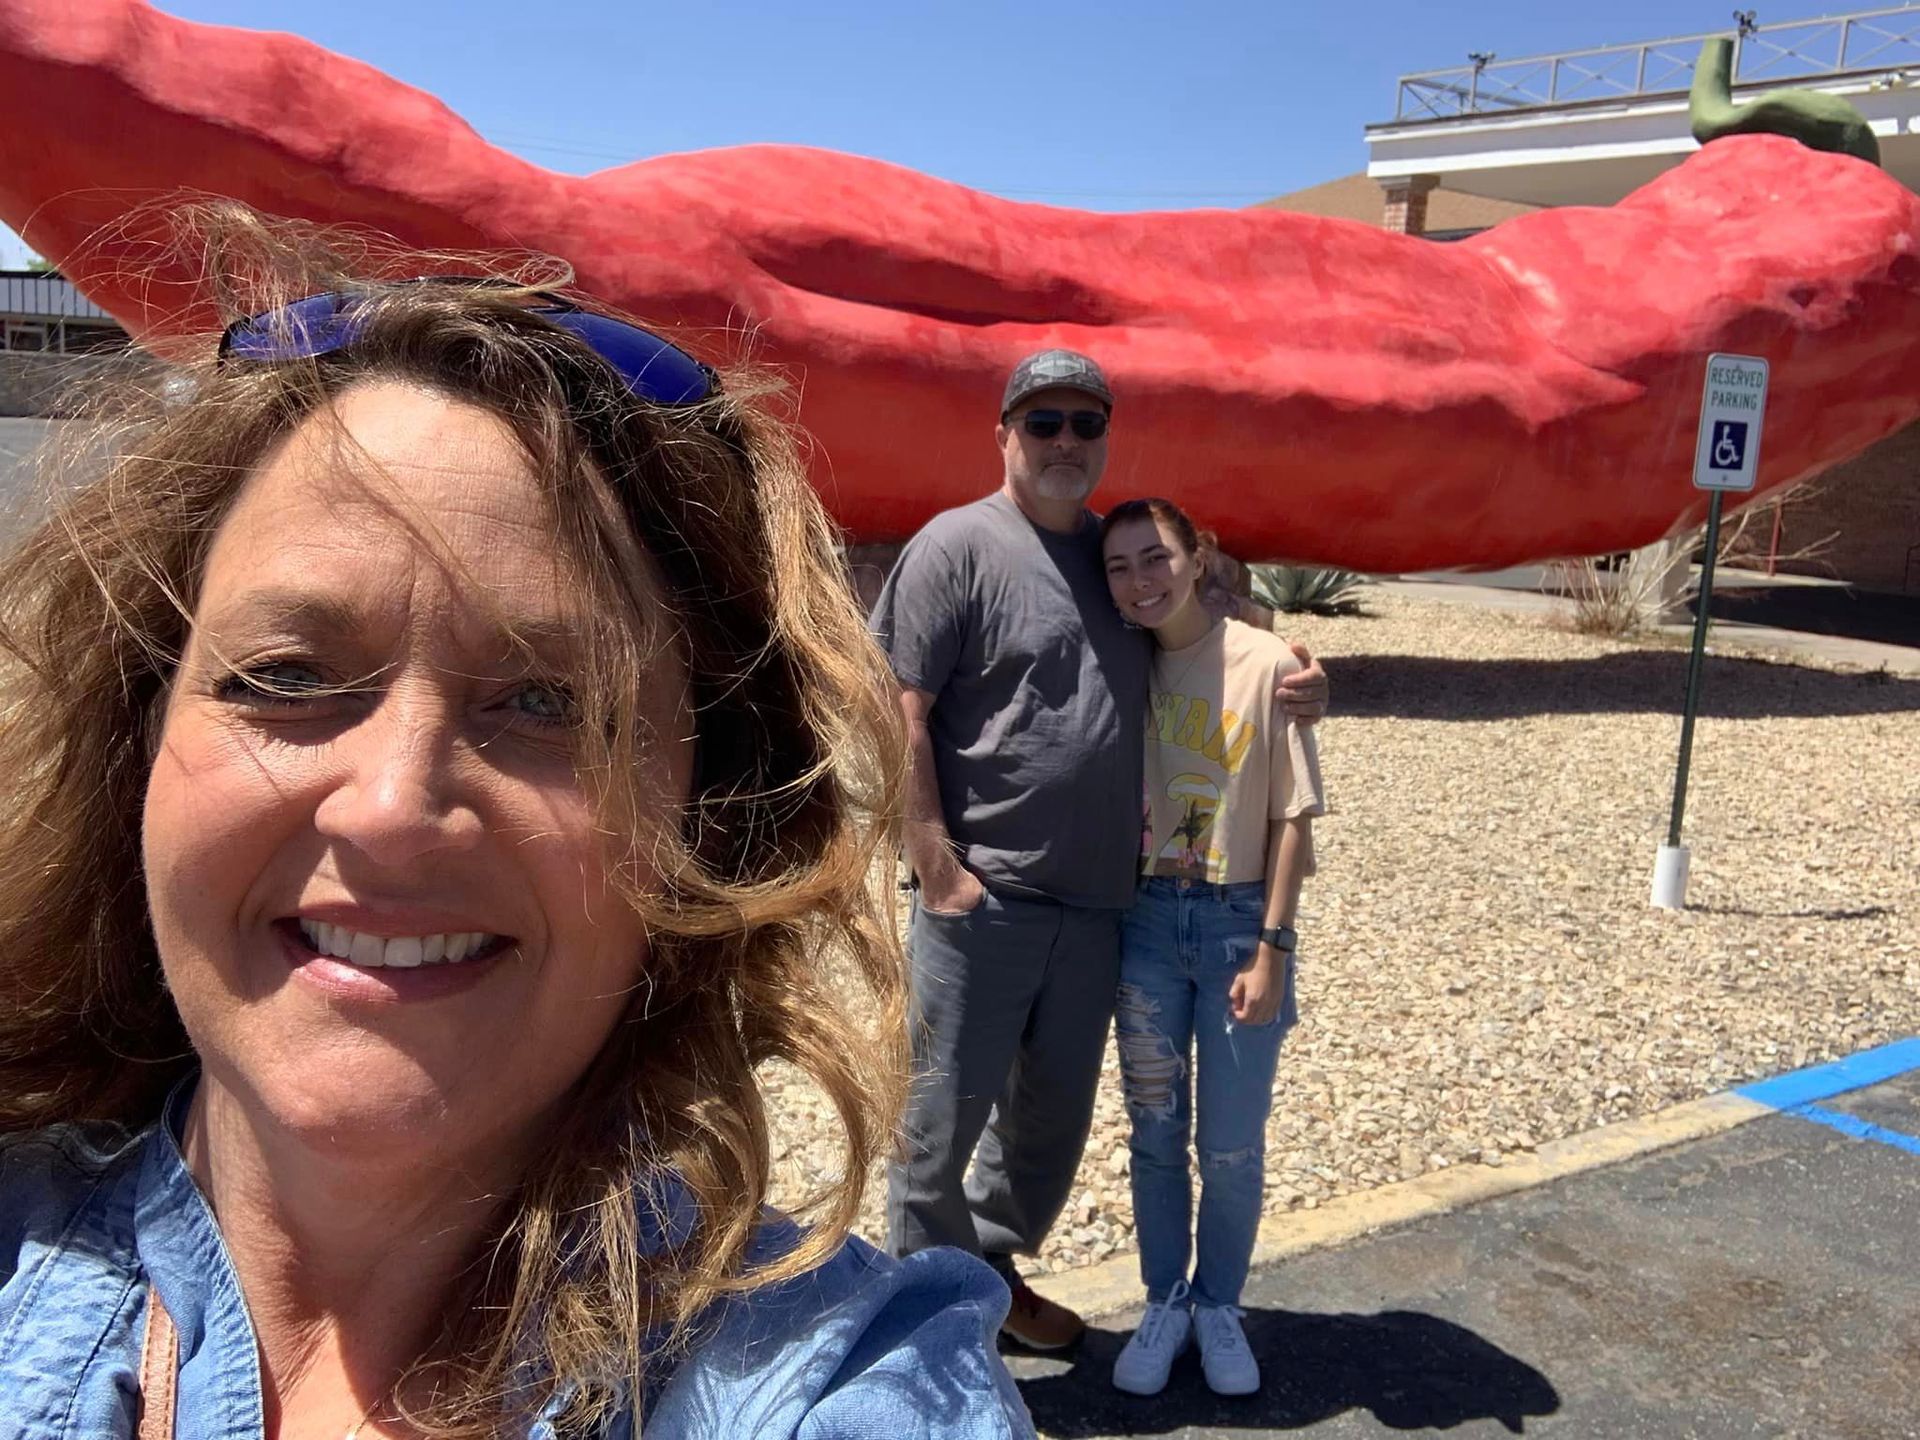 World's Largest Chile Pepper Sculpture, world record in Las Cruces, New Mexico
